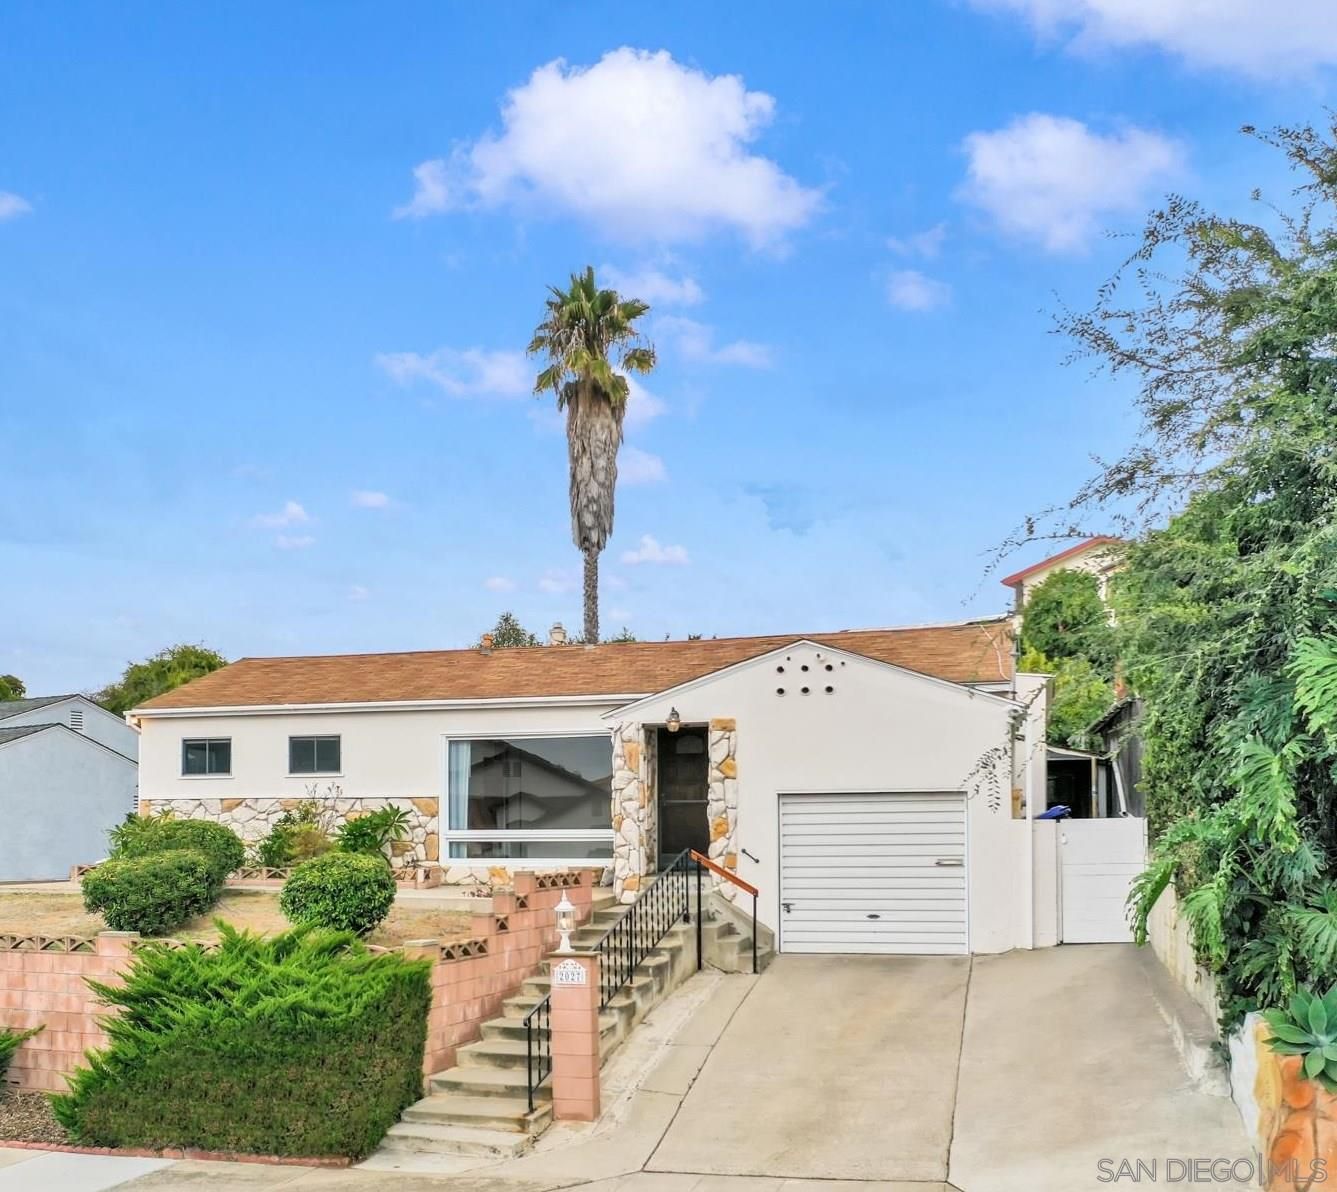 Main Photo: BAY PARK House for sale : 3 bedrooms : 2027 CECELIA TERRACE in SAN DIEGO